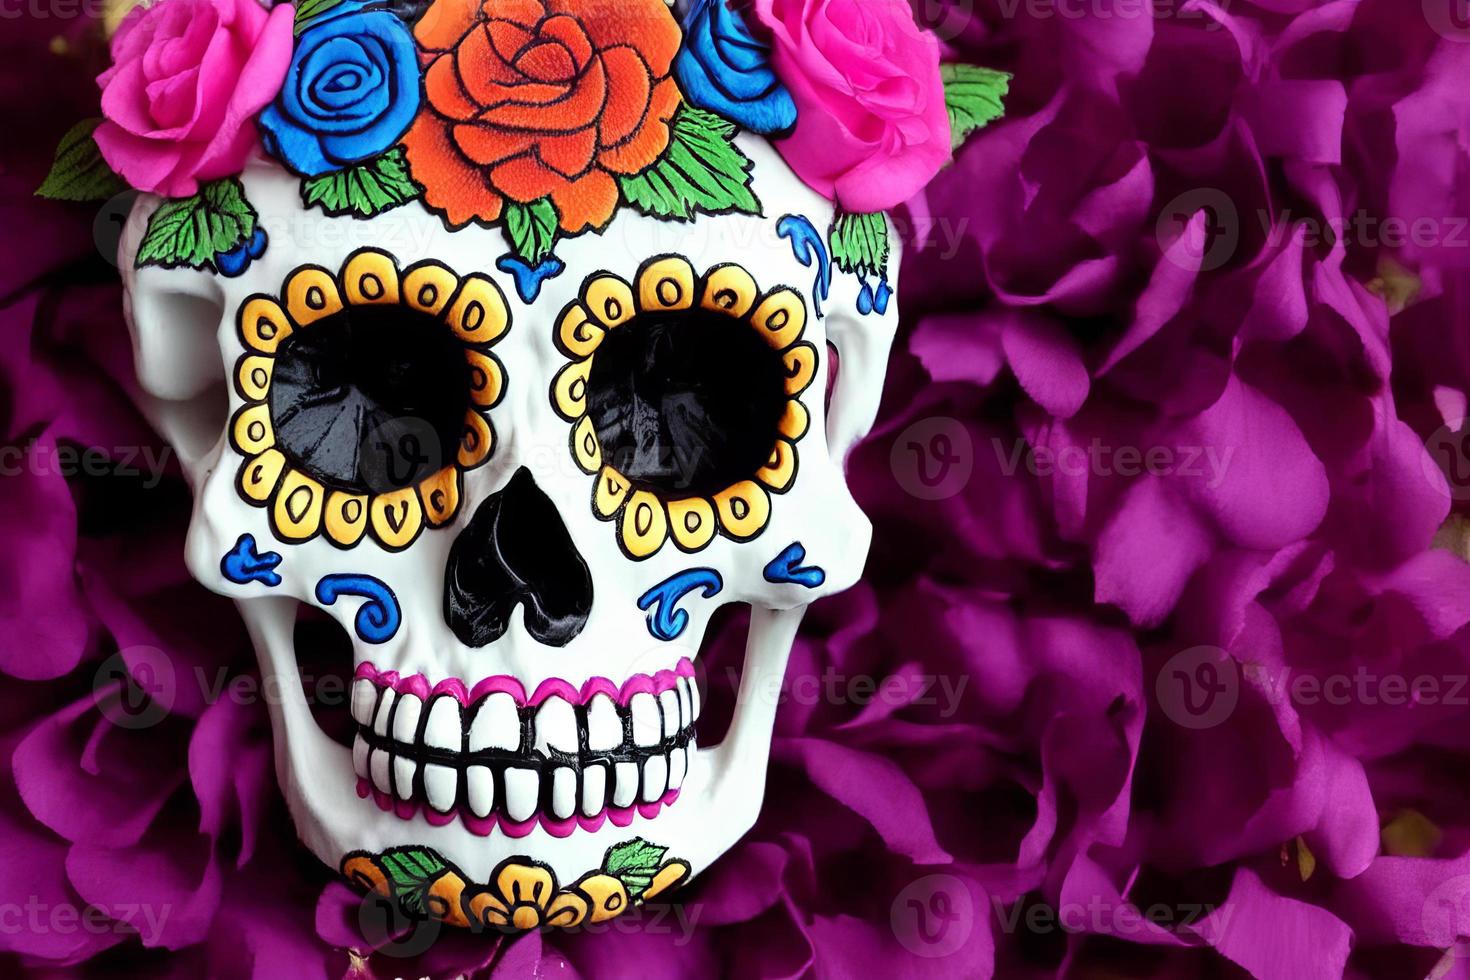 Skull covered with flowers for day of the dead mexican festival creative illustration photo